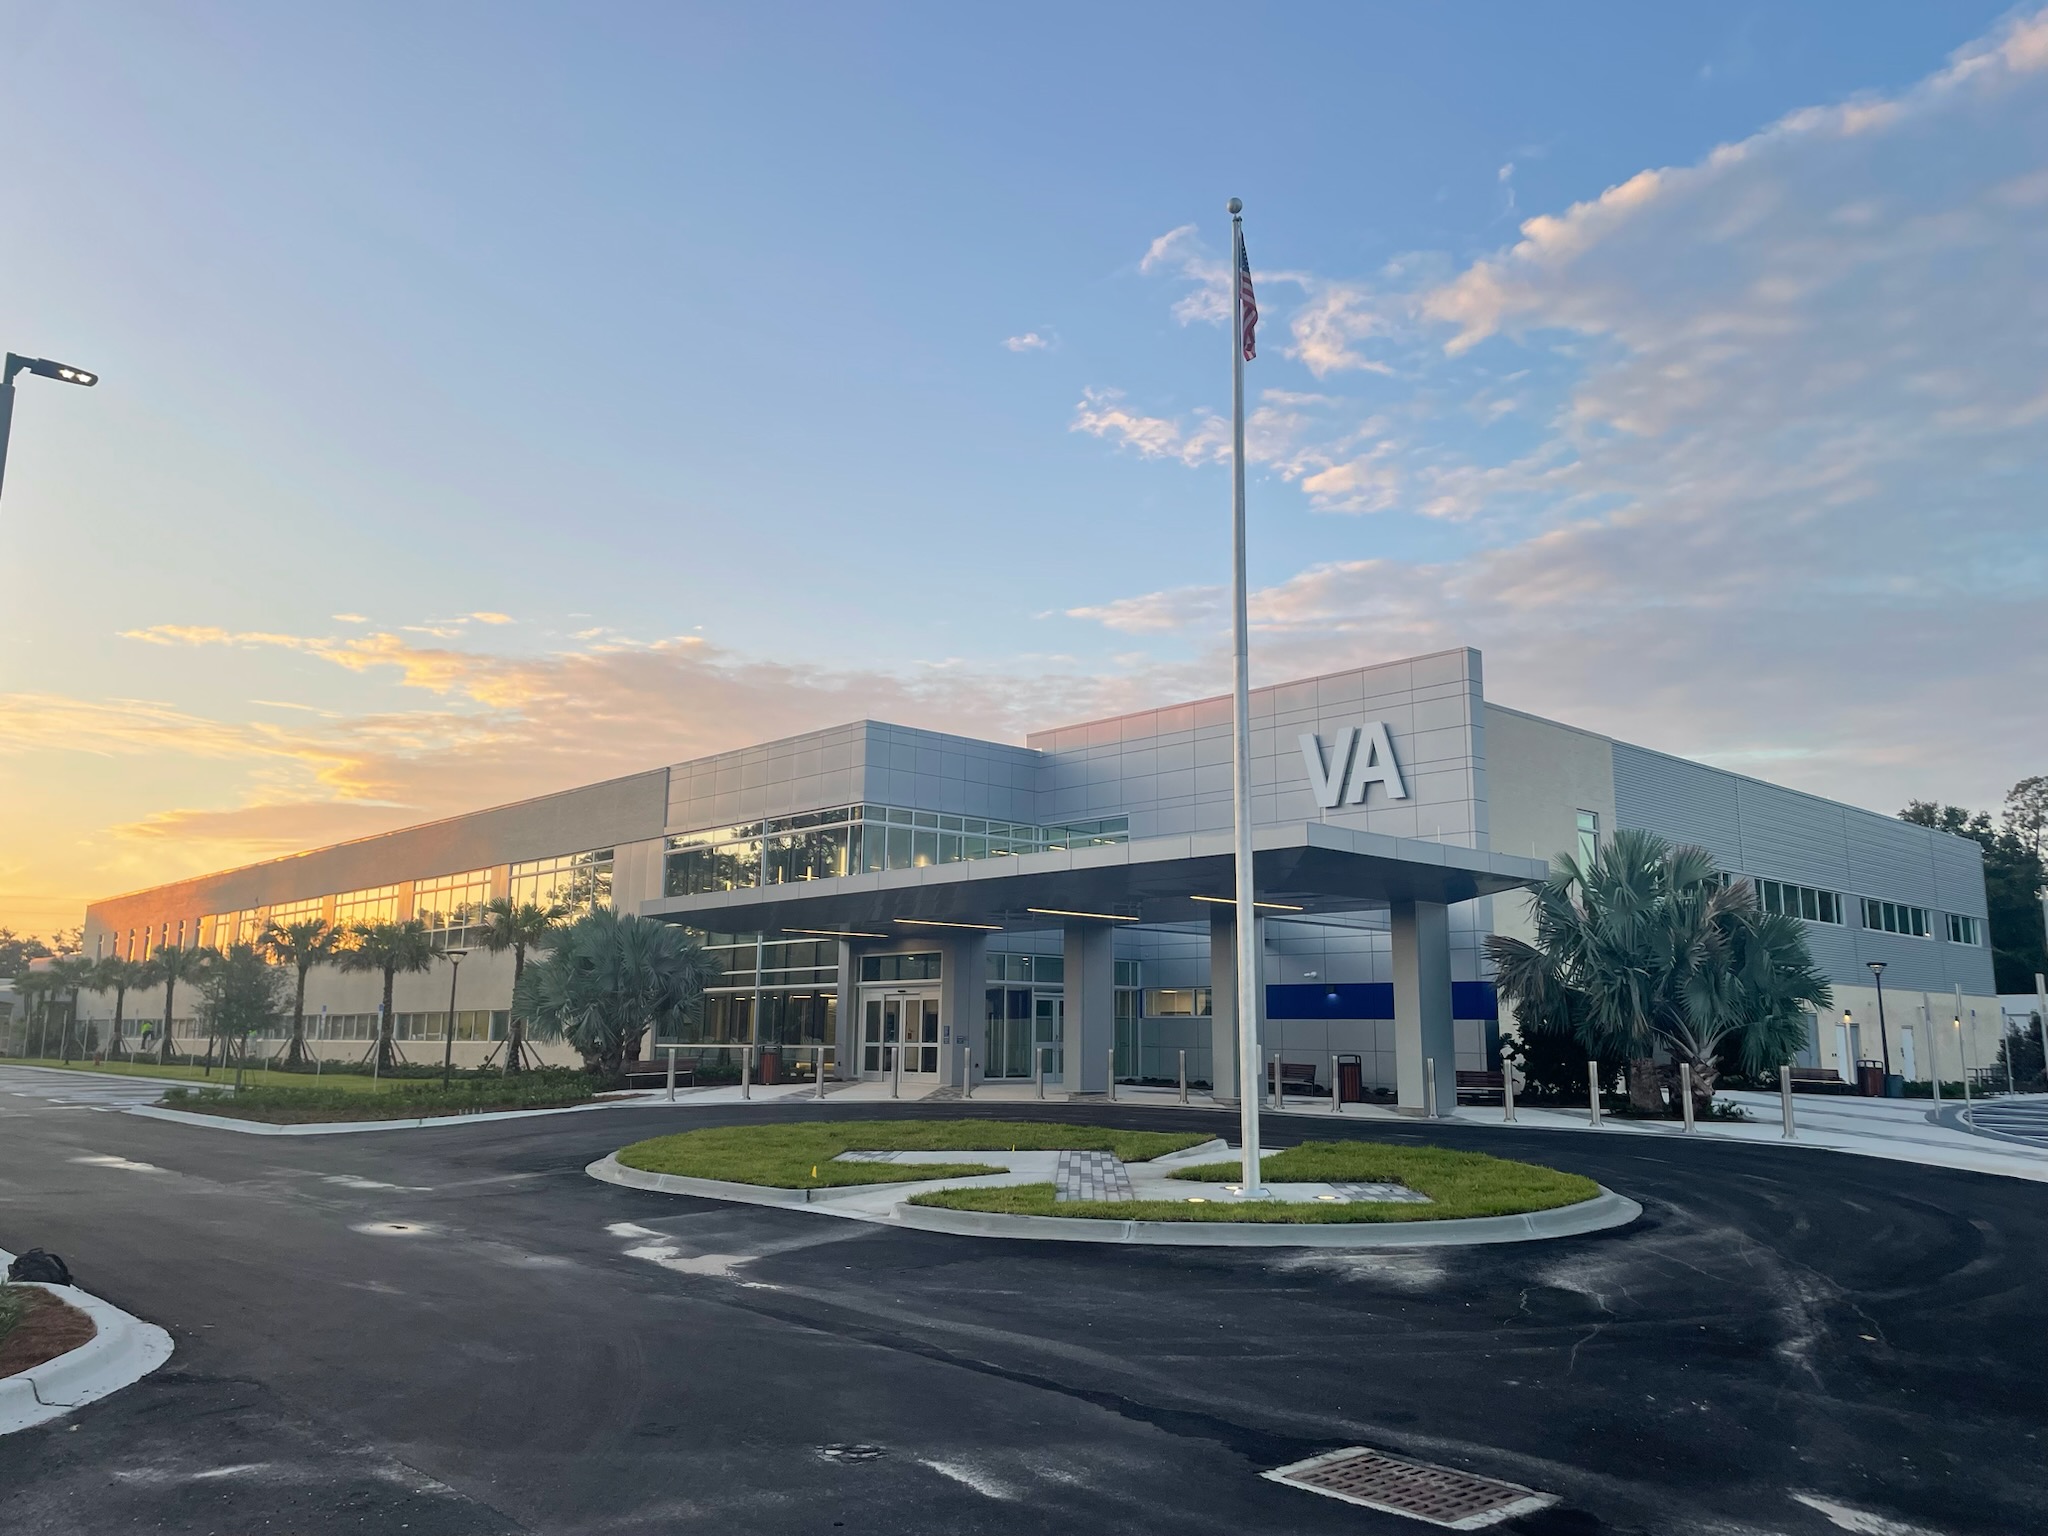 The 150,000-sf U.S. Tampa Veterans Affairs (VA) Mental Health Clinic in Temple Terrace, Fla., developed by Cullinan Properties